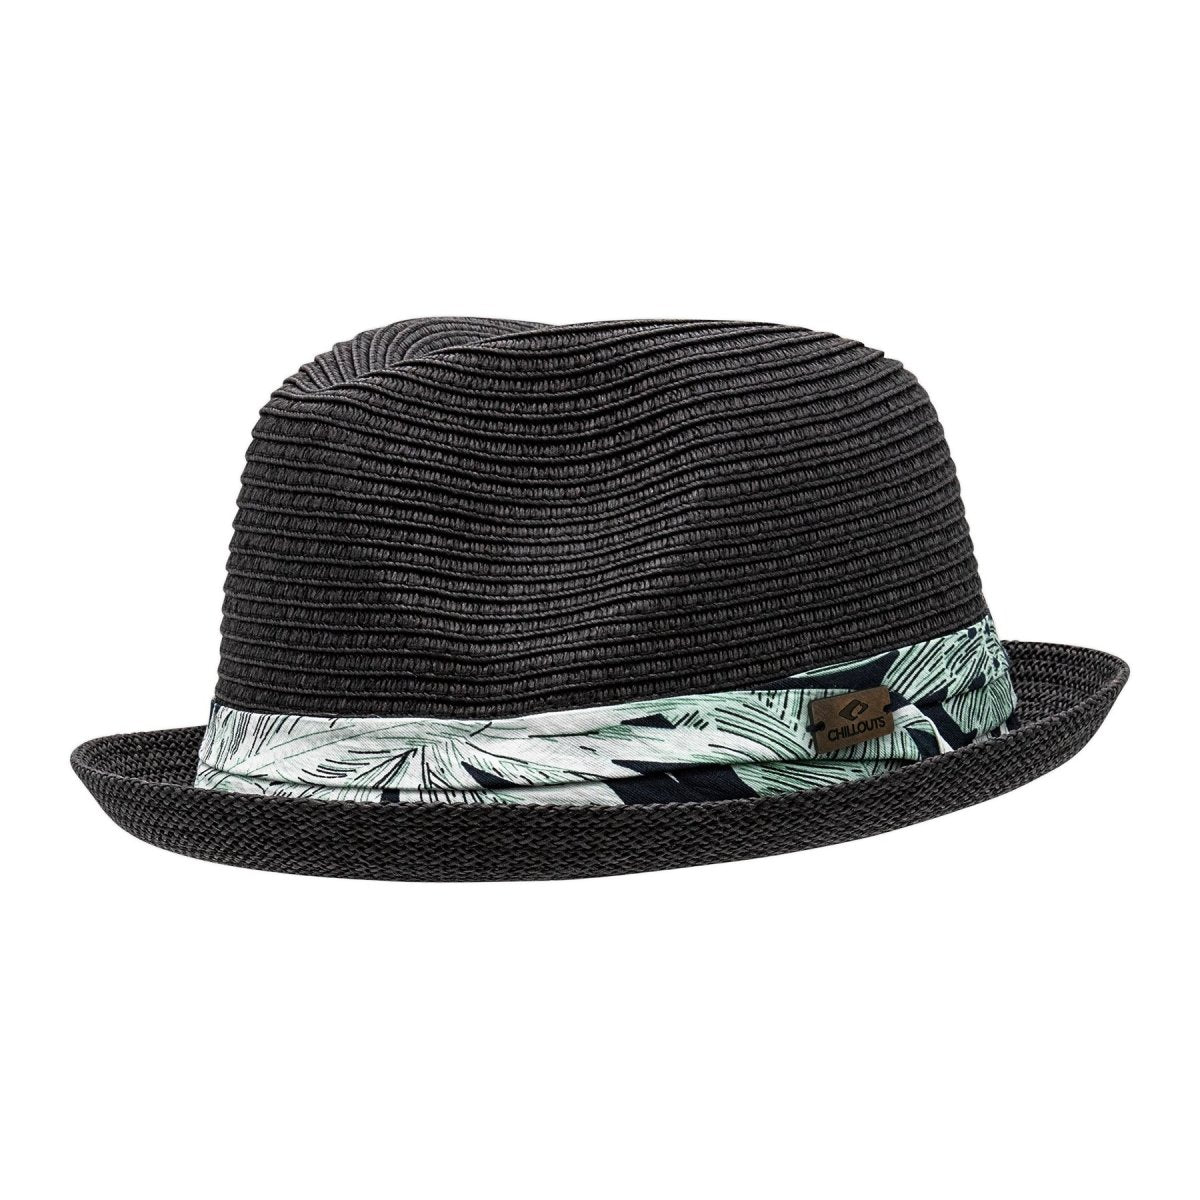 with - a Chillouts band hat men buy online patterned for now Headwear – Pork pie